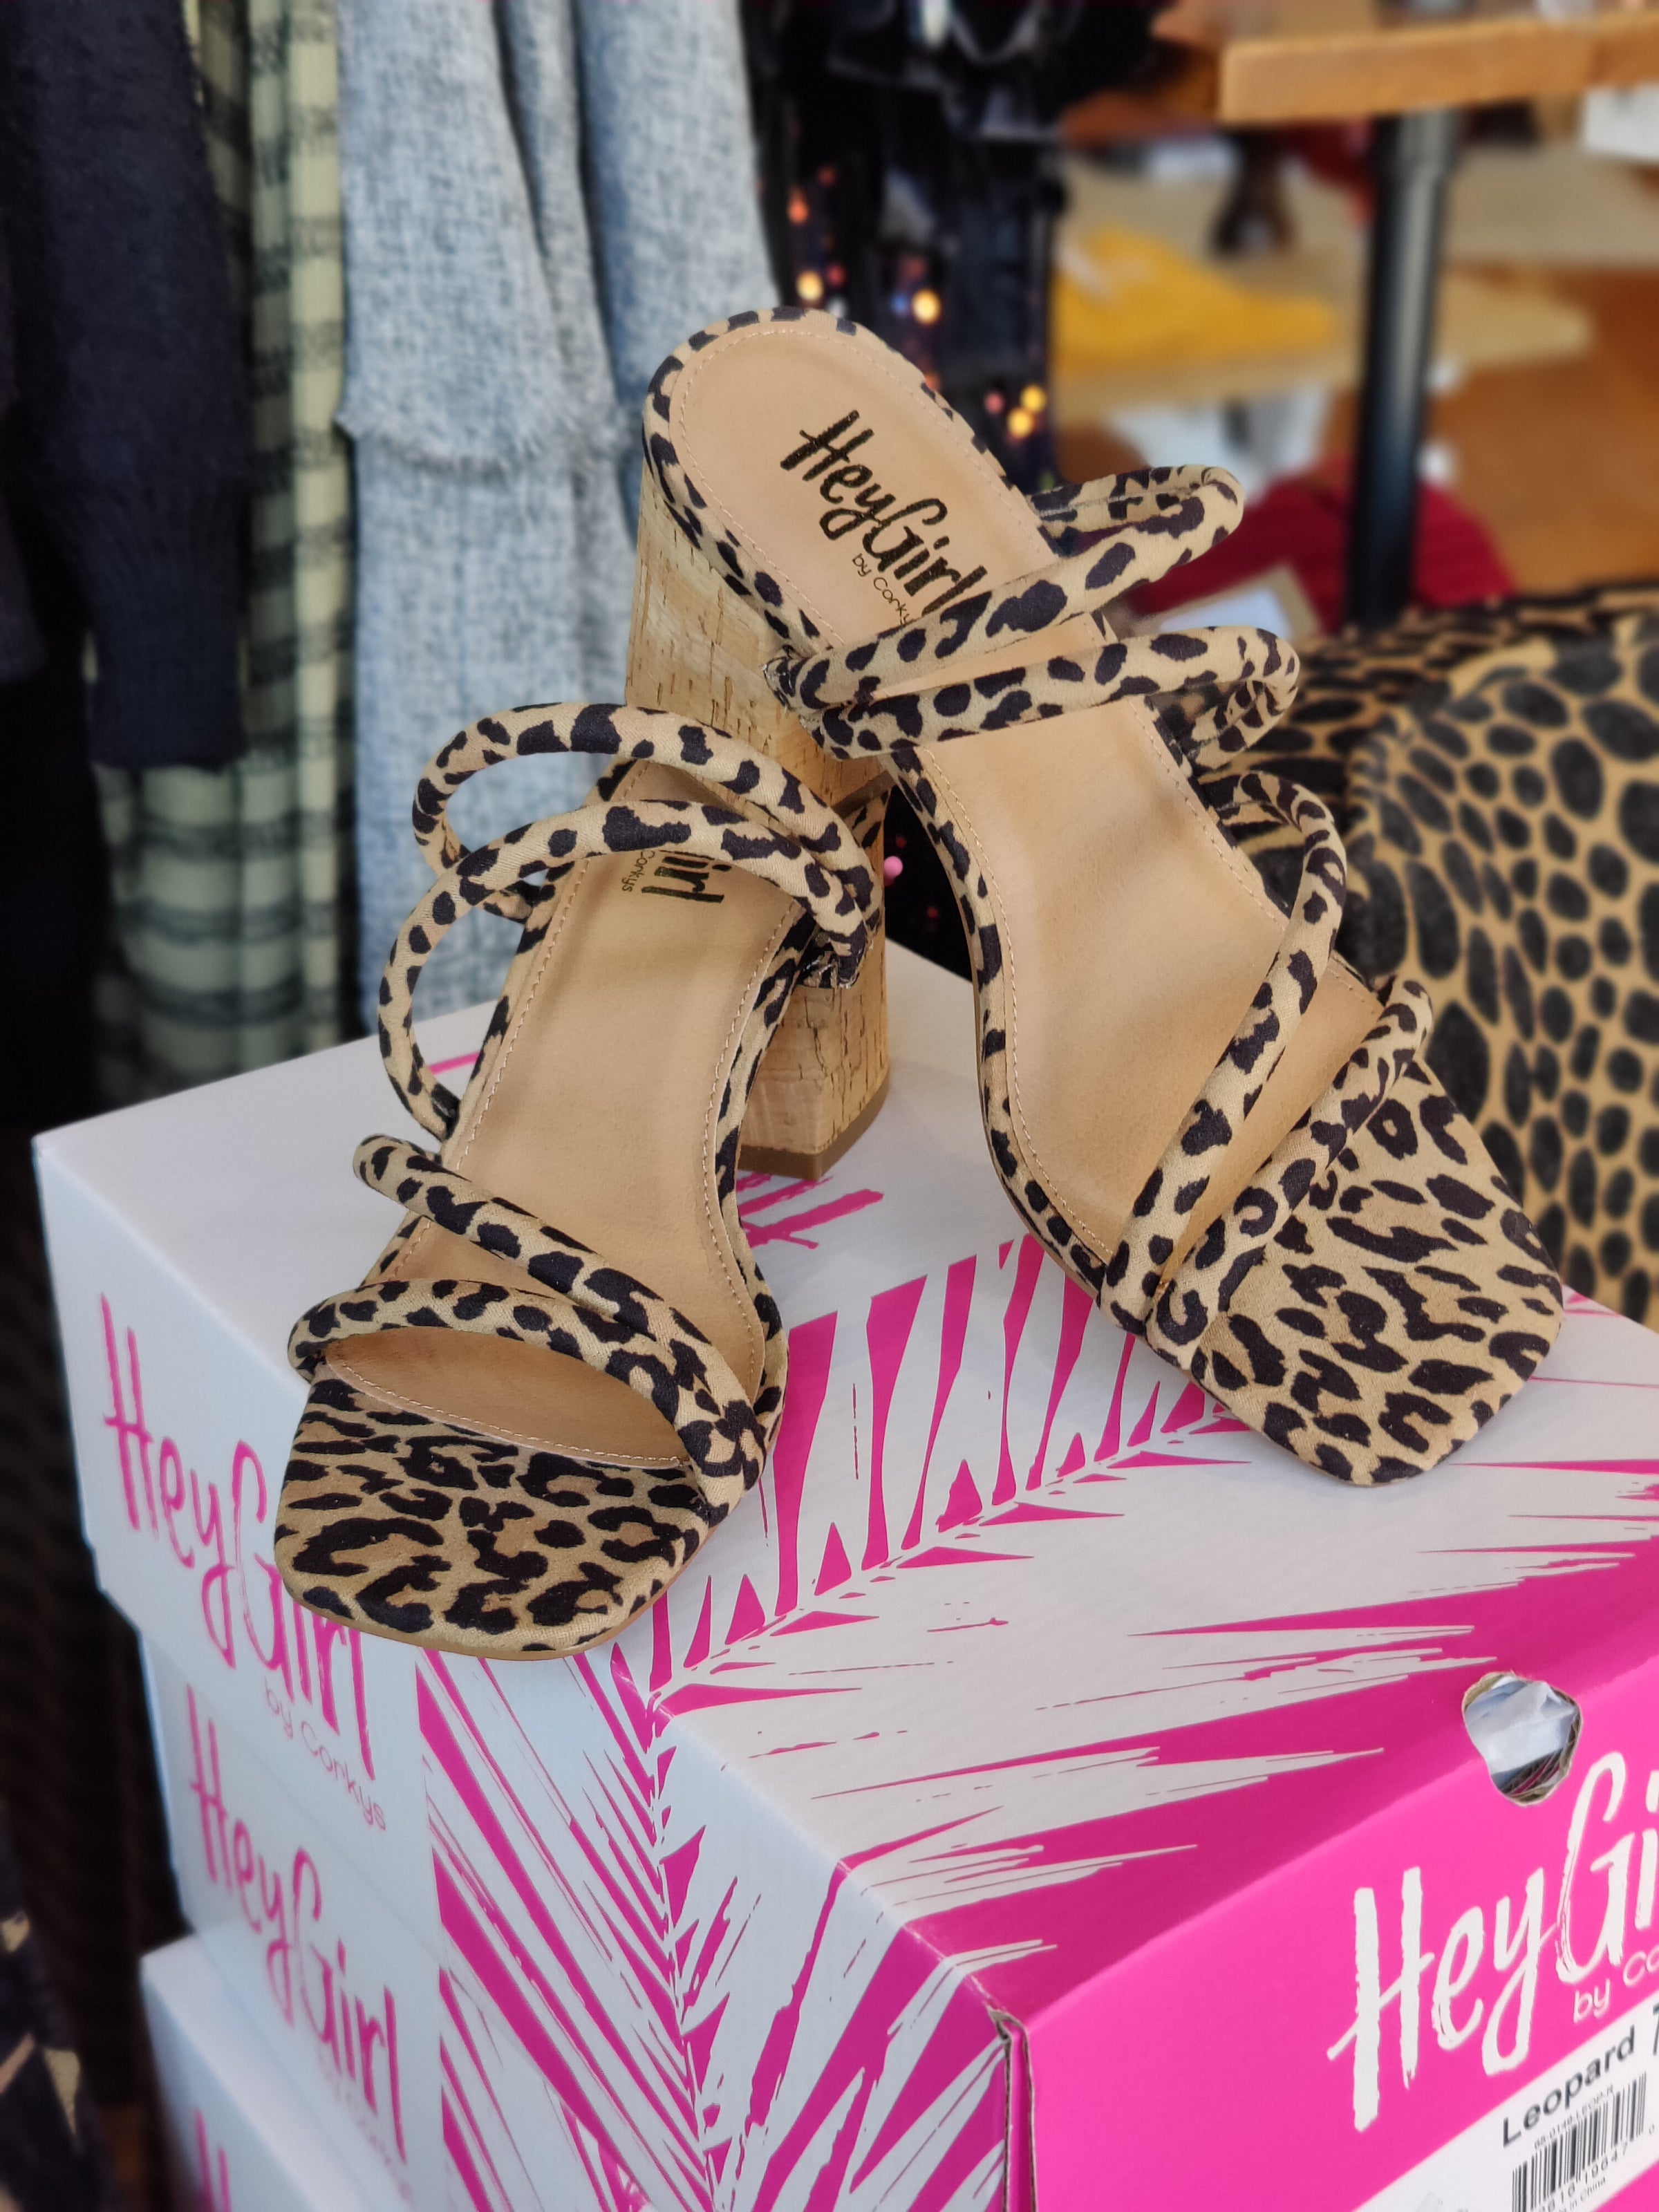 Corky' Small Leopard Booties - Backwards Saddle Boutique